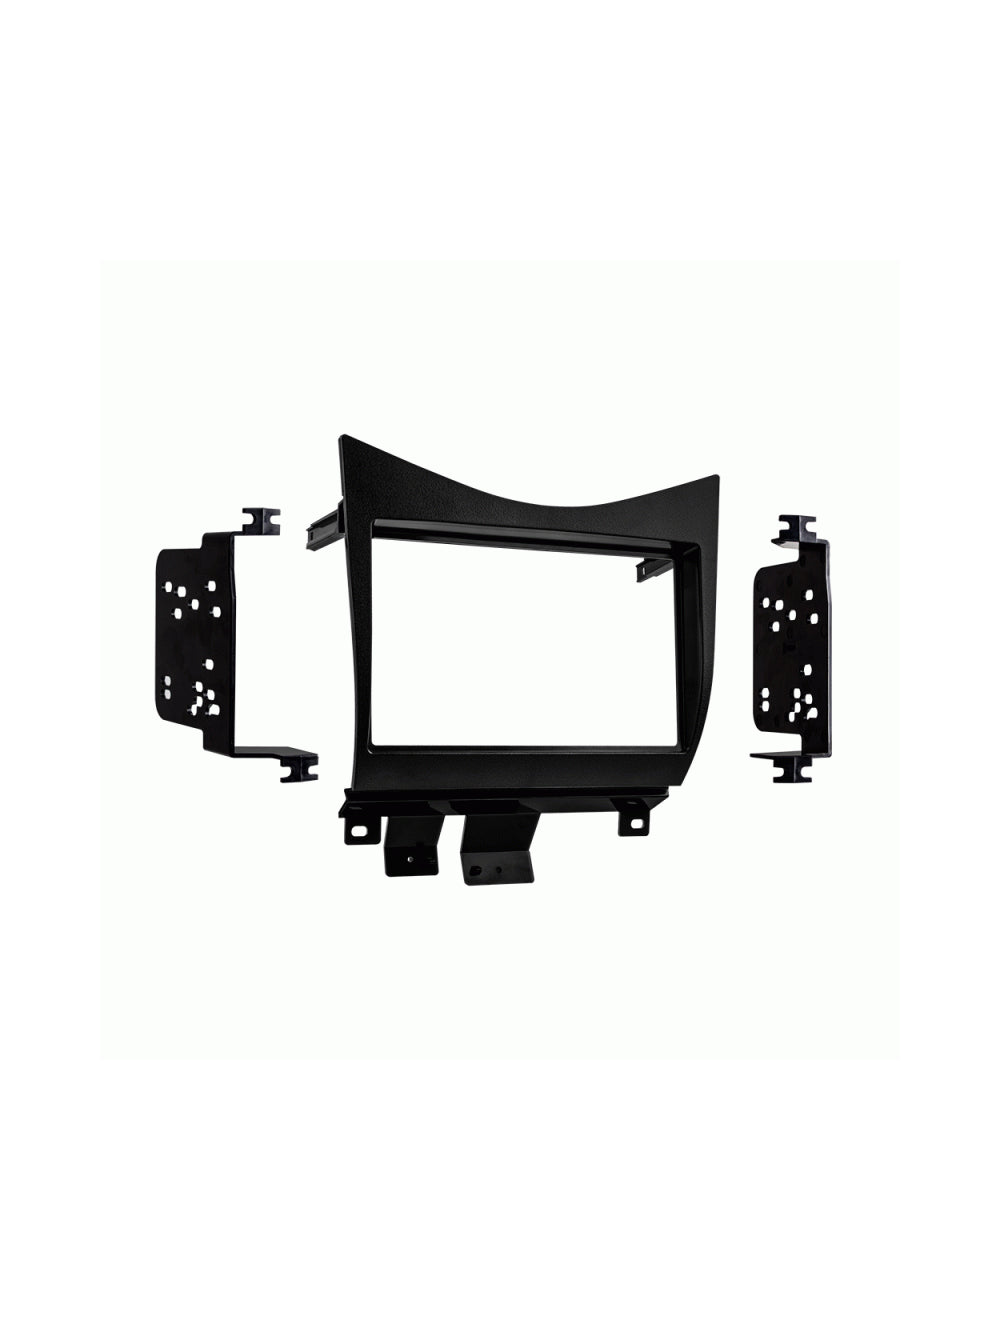 Metra 95-7862 Double-DIN Installation Kit for 2003-2007 Honda Accord Lower